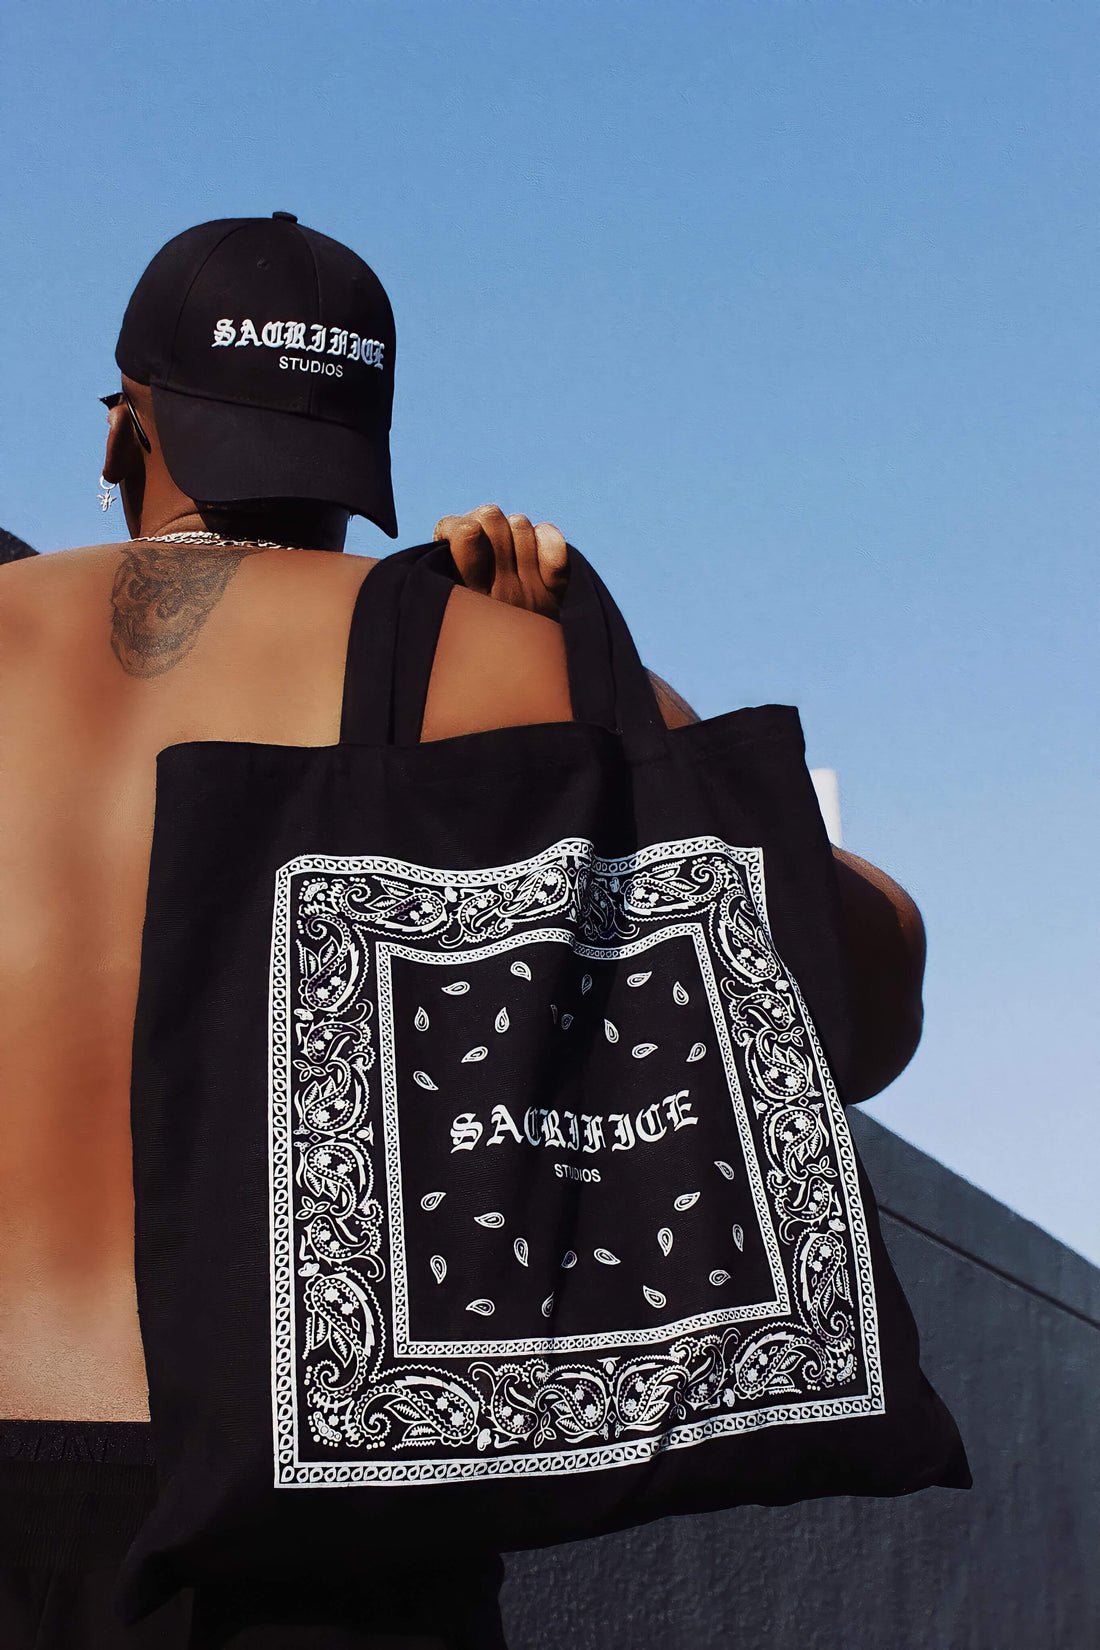 SACRIFICE STUDIOS - Elevating Streetwear with Luxury Design. Expertly crafted in Portugal.